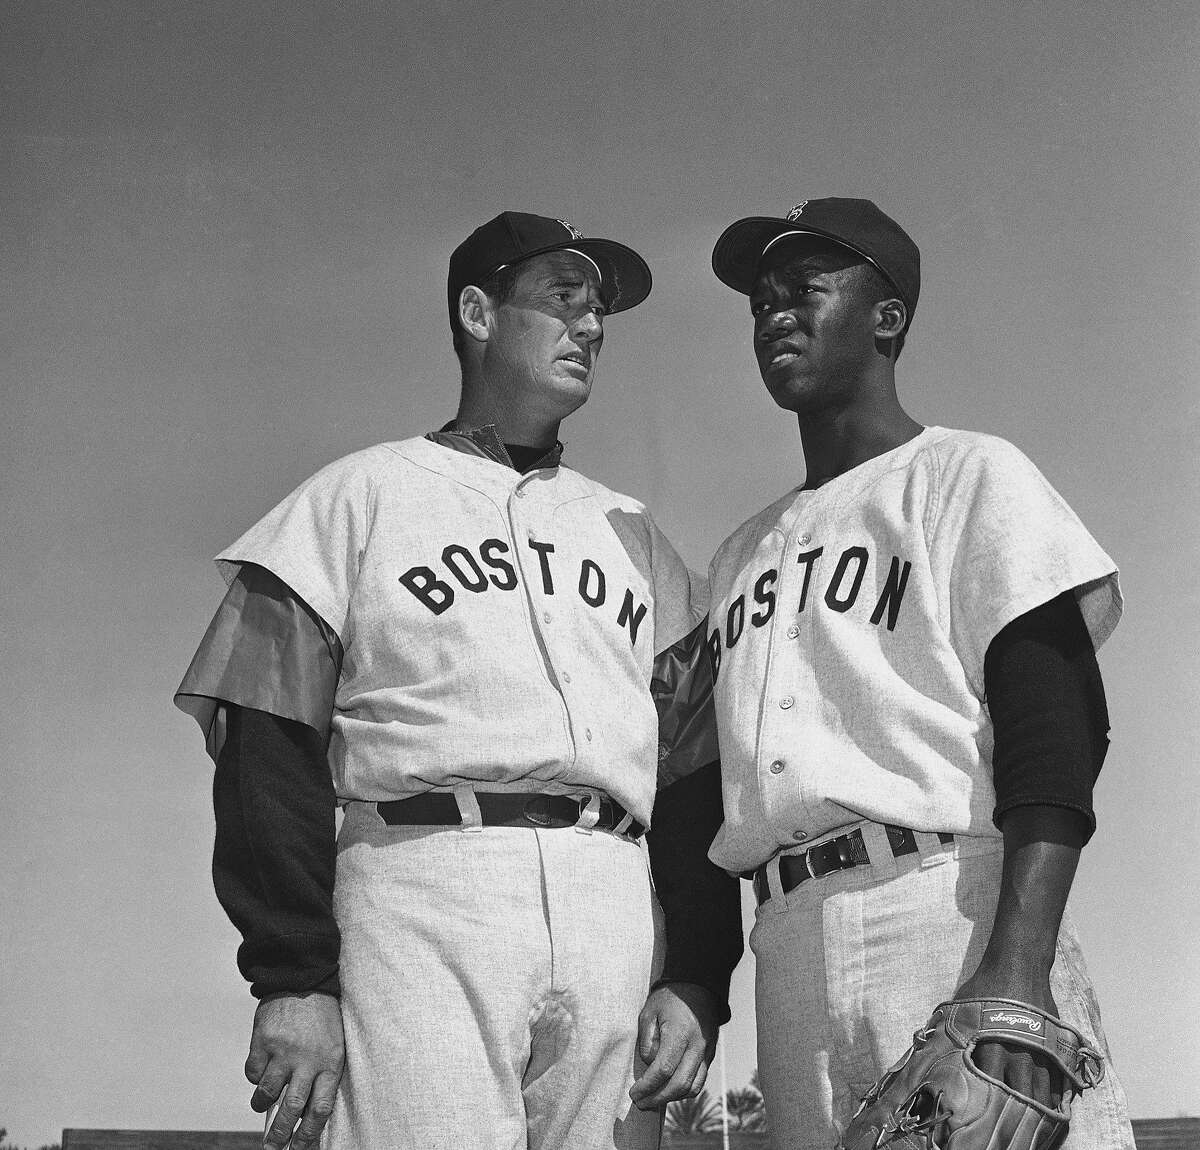 FILE - In this March 4, 1959, file photo, Ted Williams, long-time Red Sox batting ace, chats with E.J. (Pumpsie) Green at the Boston training camp in Scottsdale, Ariz. A new film explores the life of baseball legend Williams who struggled with his Mexican-American heritage and his volatile relationship with his family and the press. The upcoming PBS "American Masters" documentary on the former Boston Red Sox slugger uses rare footage and family interviews to paint a picture of a complicated figure that hid his past but later spoke out and defended black players. (AP Photo/Harold Filan, File)